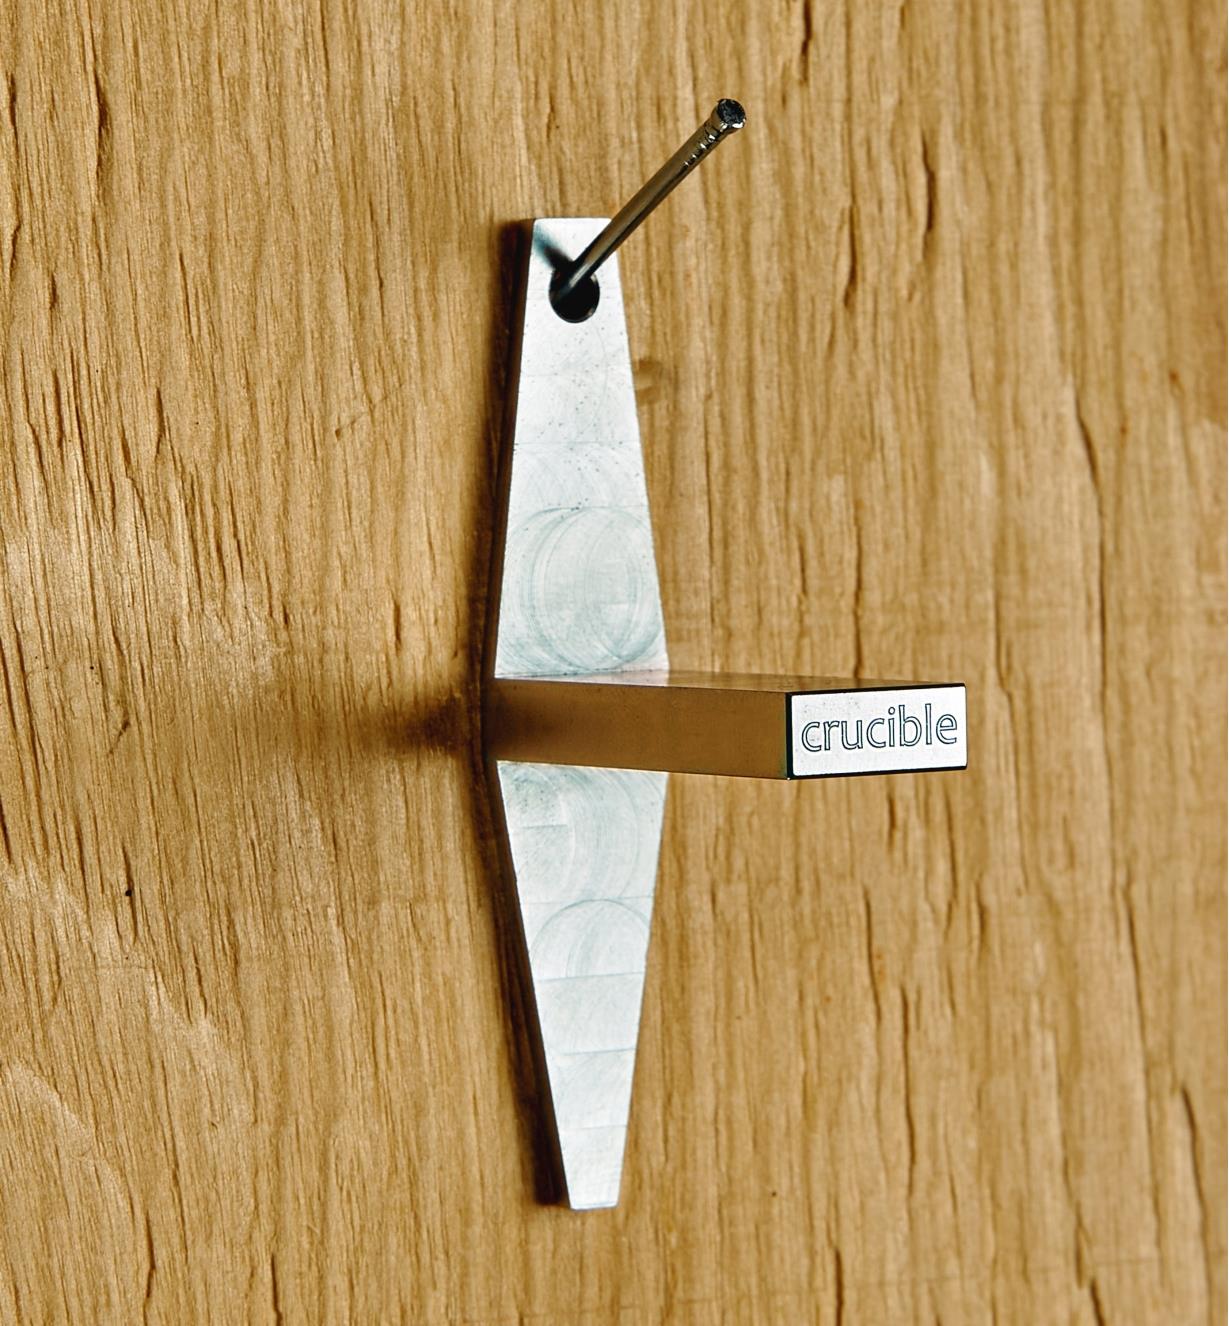 A dovetail template hangs on a nail on a wall